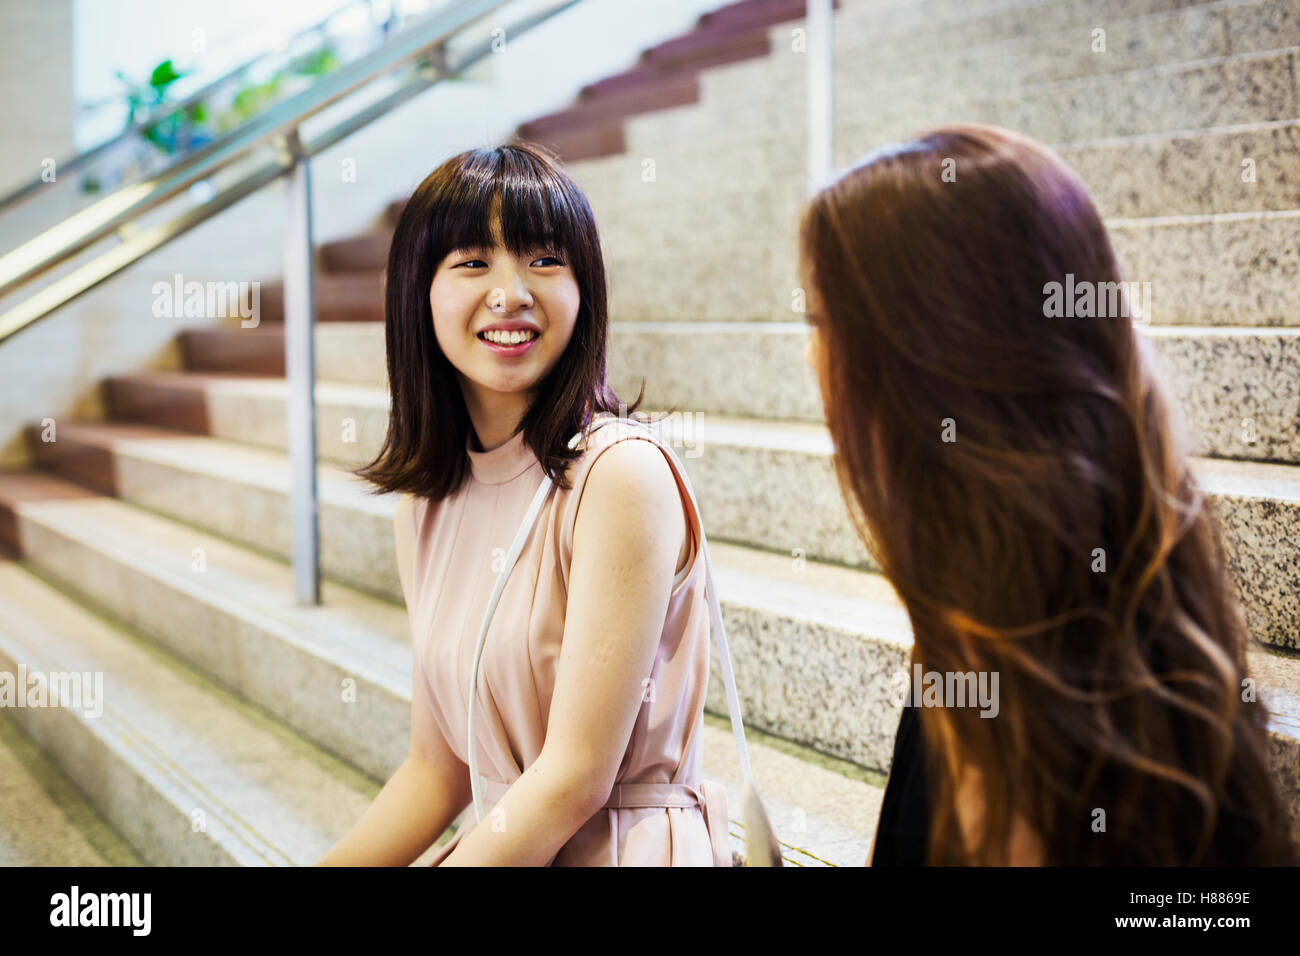 Two smiling young women with long brown hair sitting on a staircase. Stock Photo